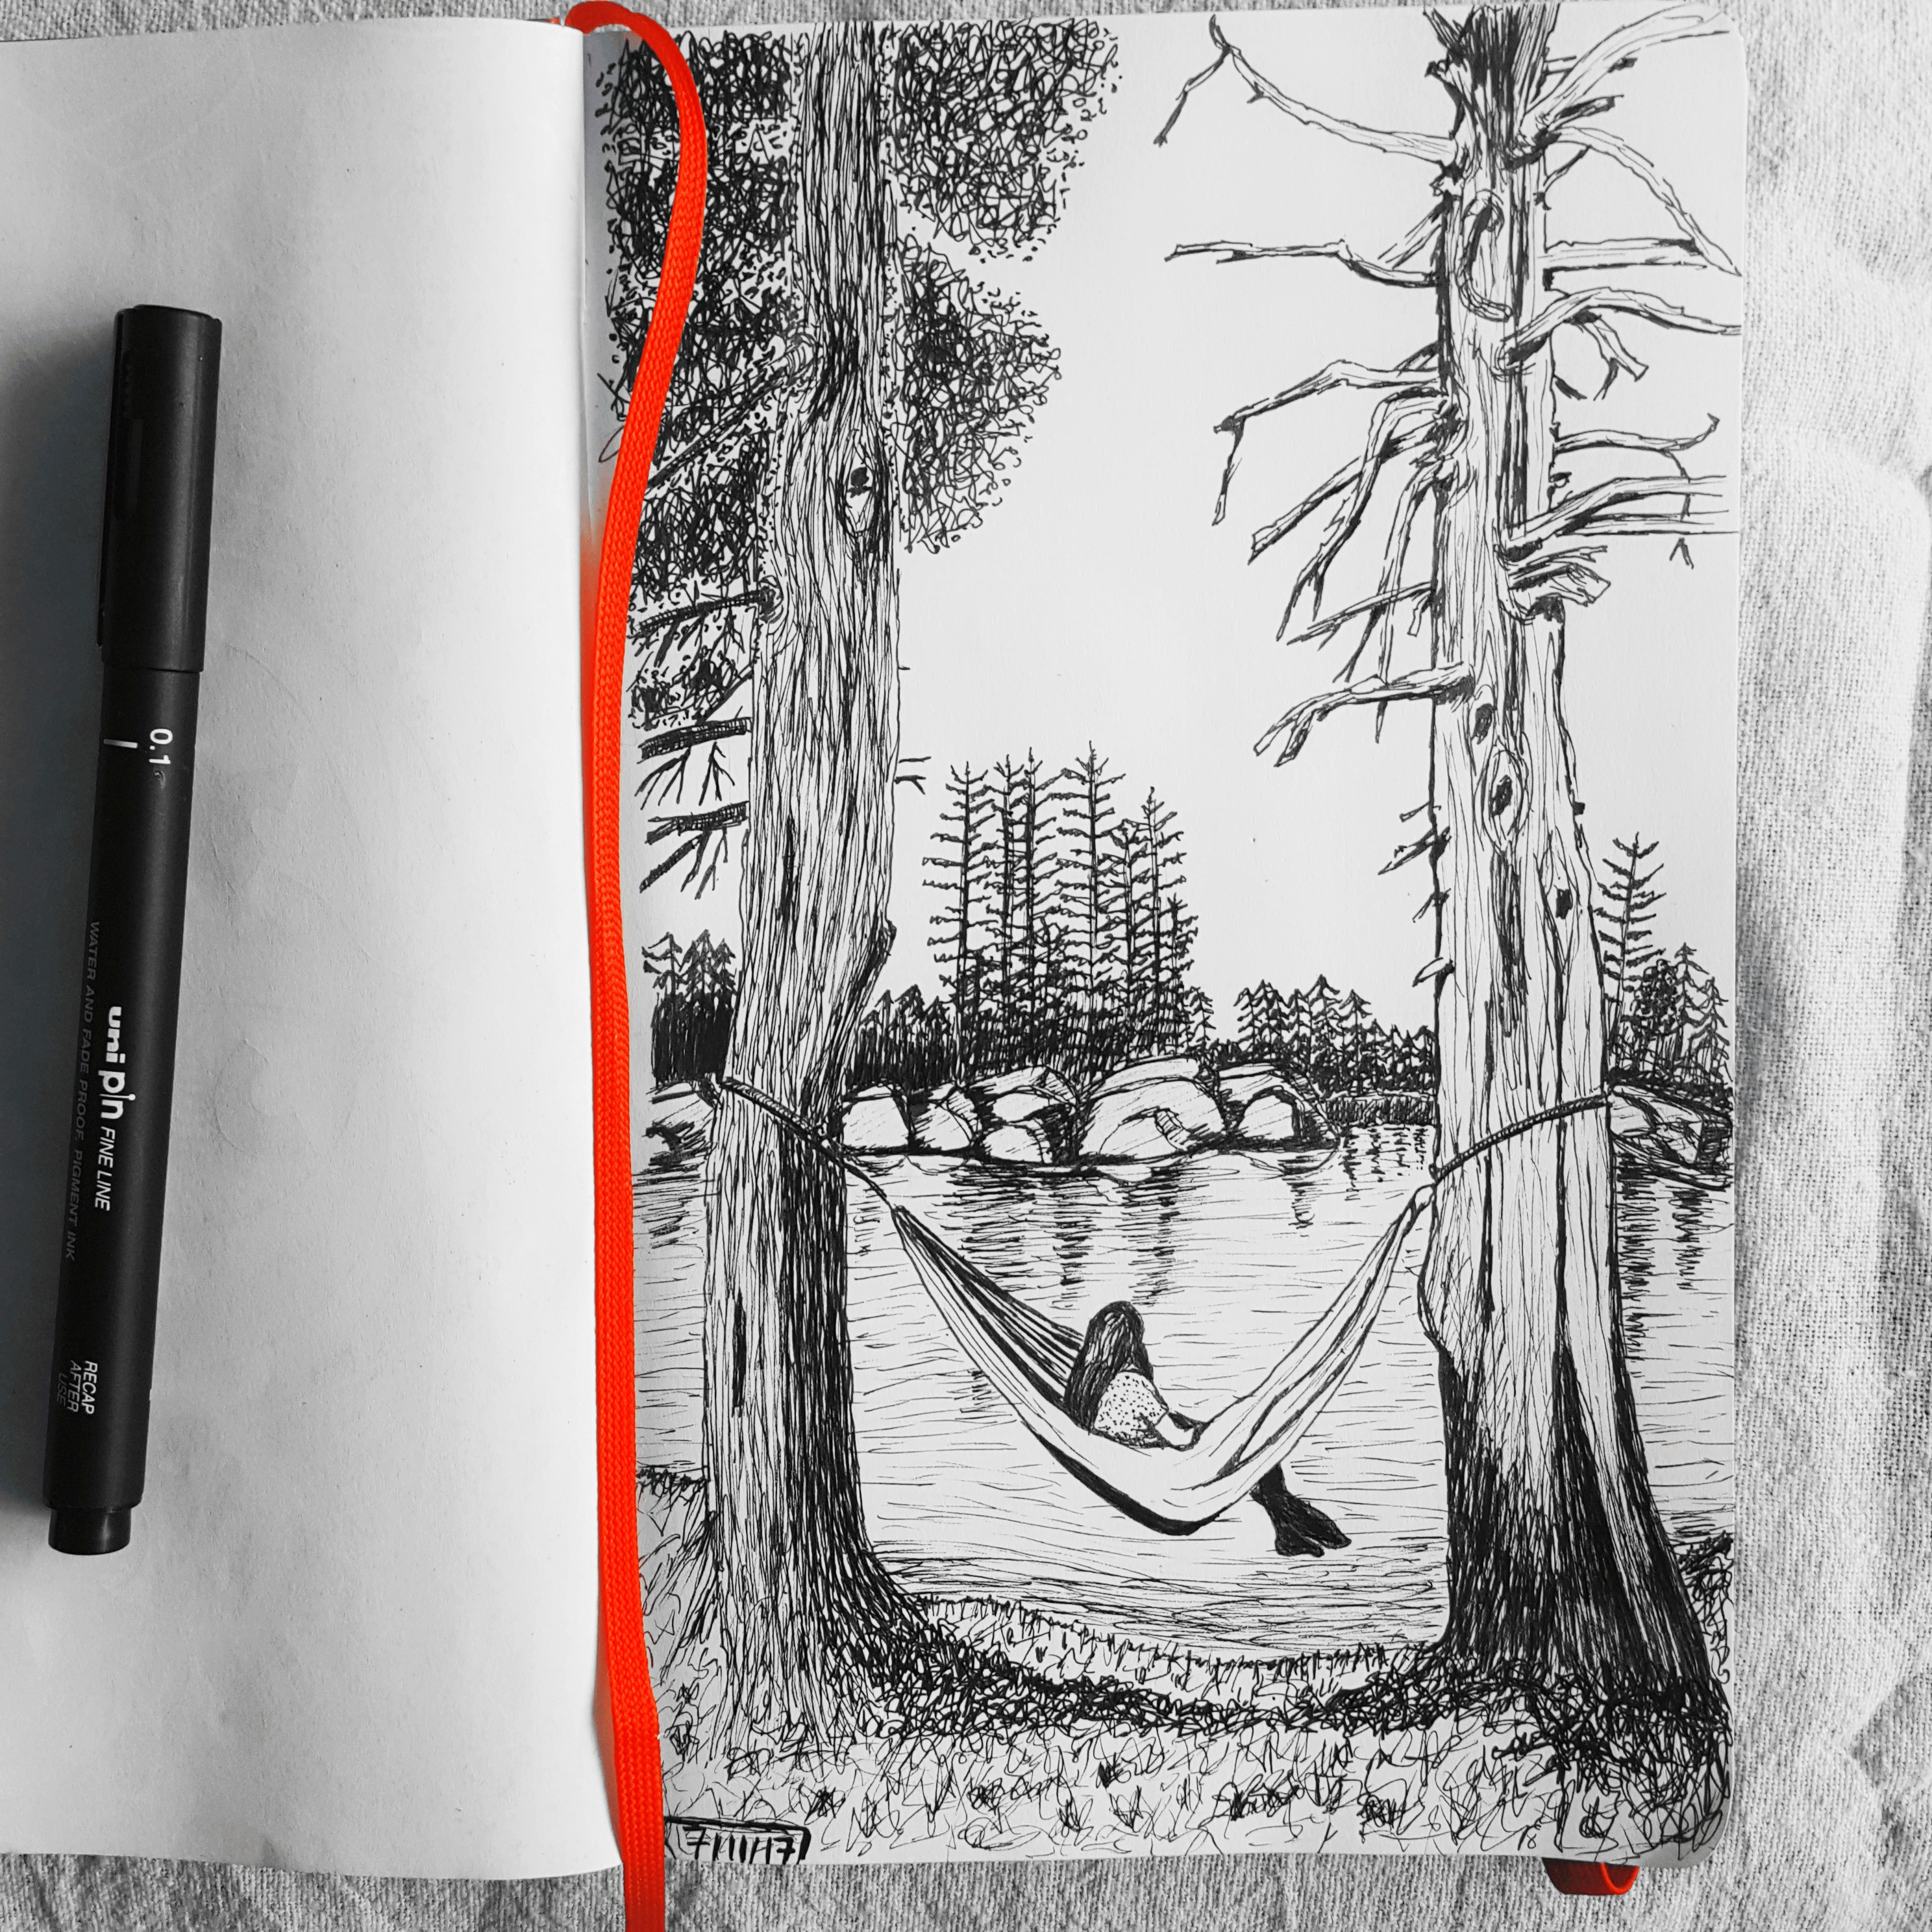 First attempt of sketching nature